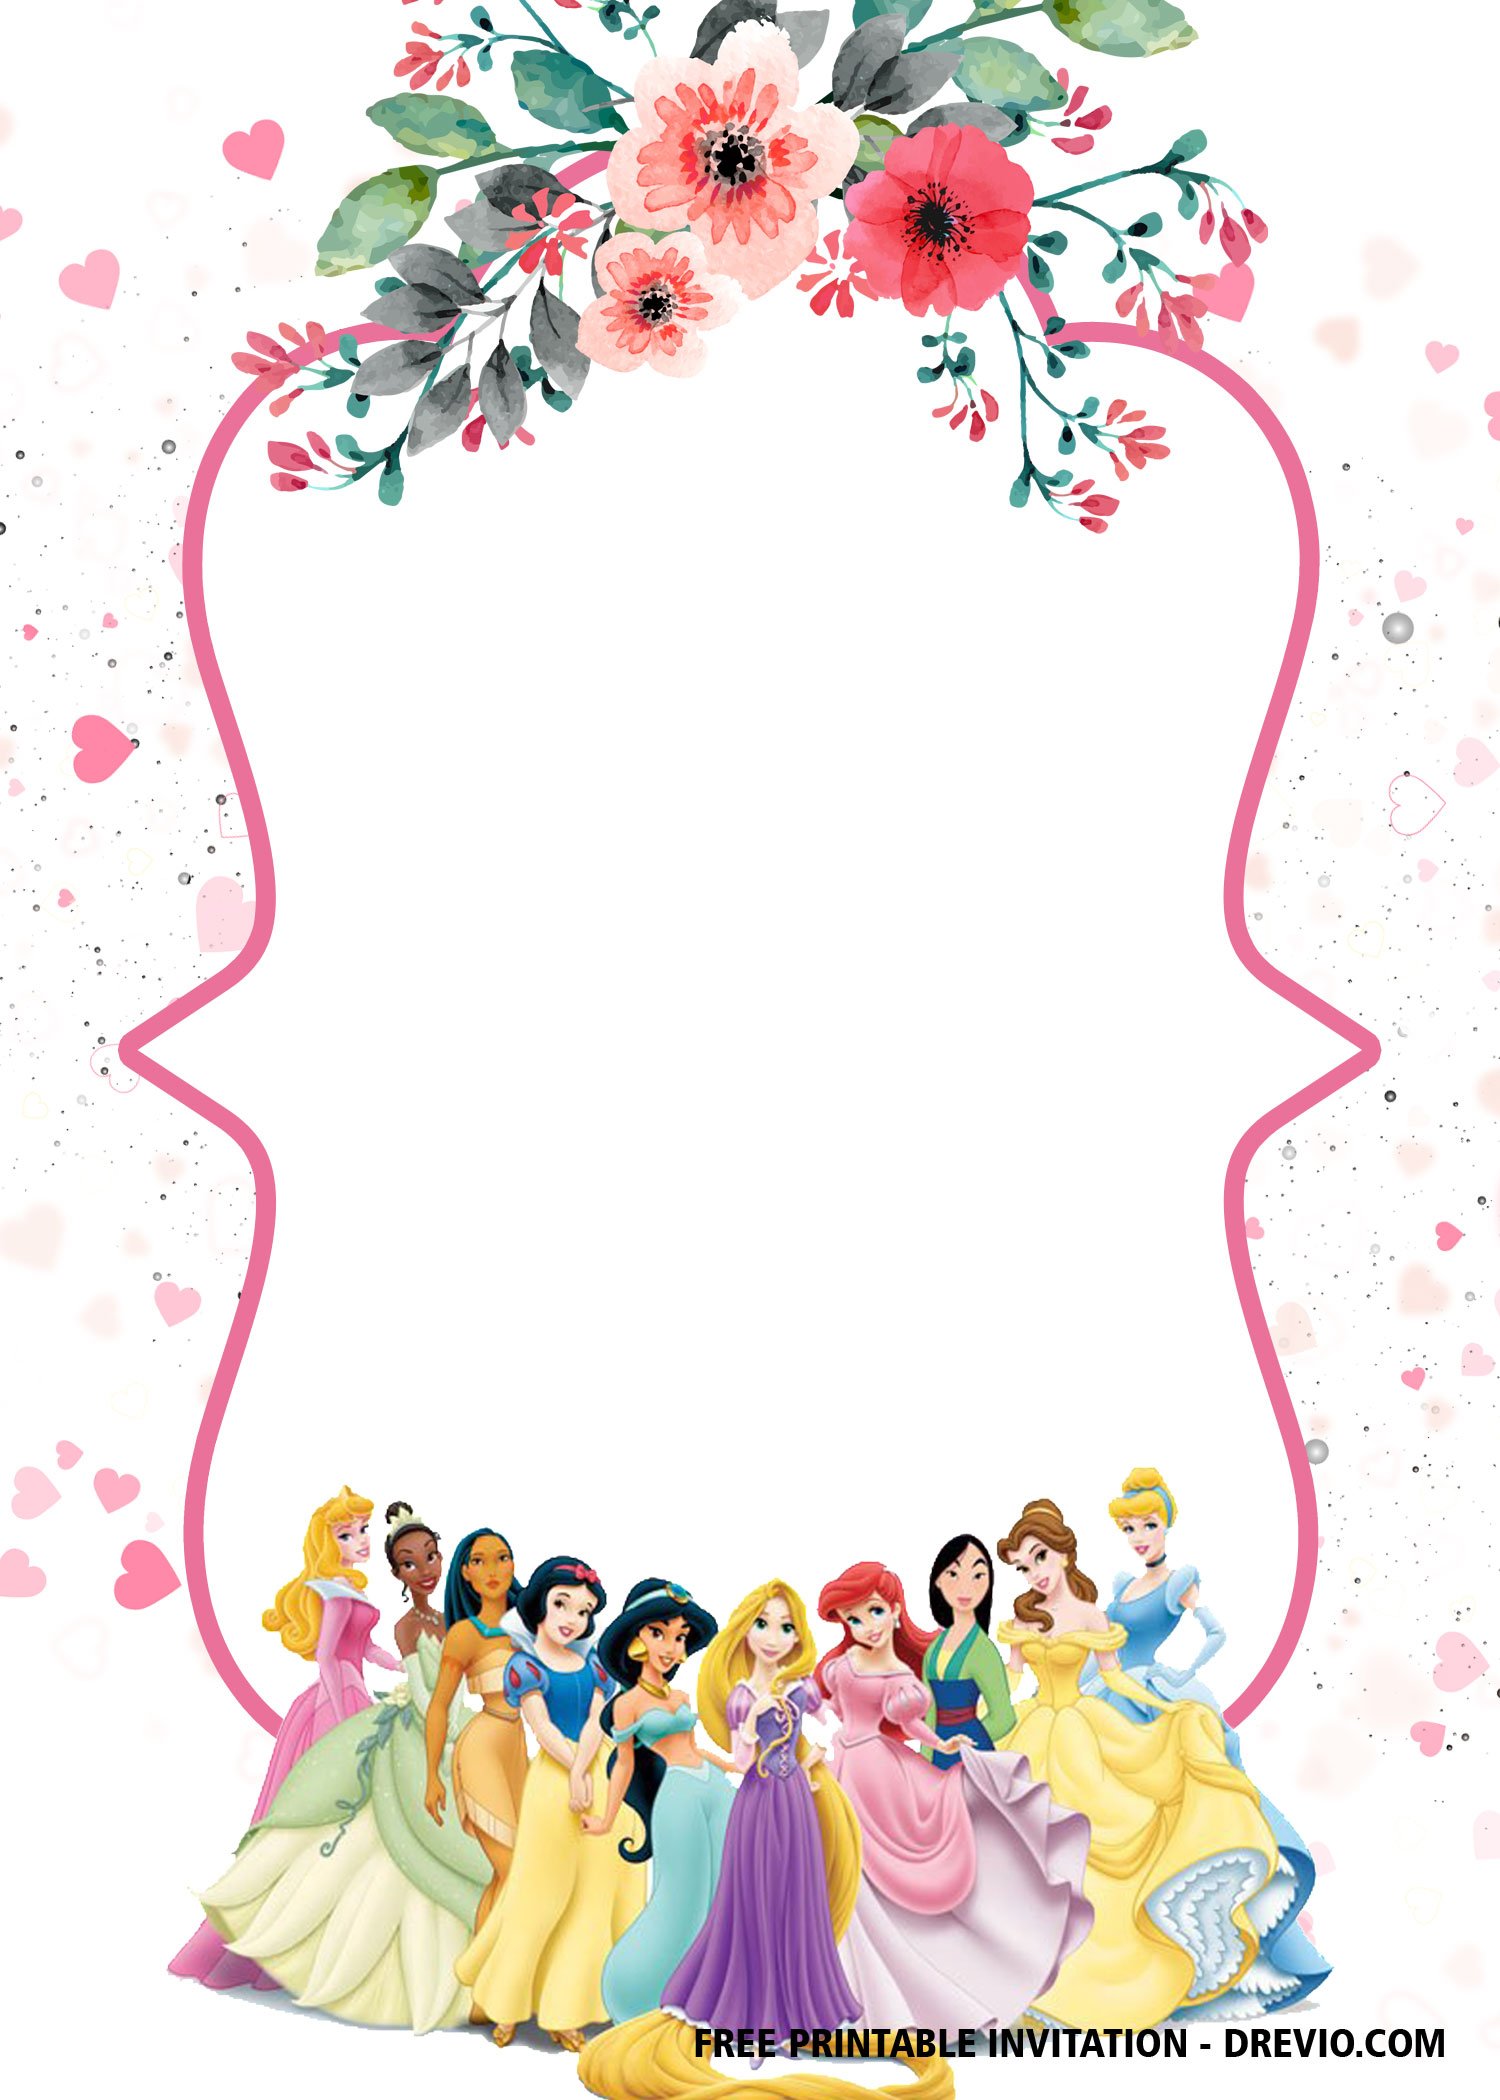 FREE Disney Princess Invitation Template for Your Little Girl's